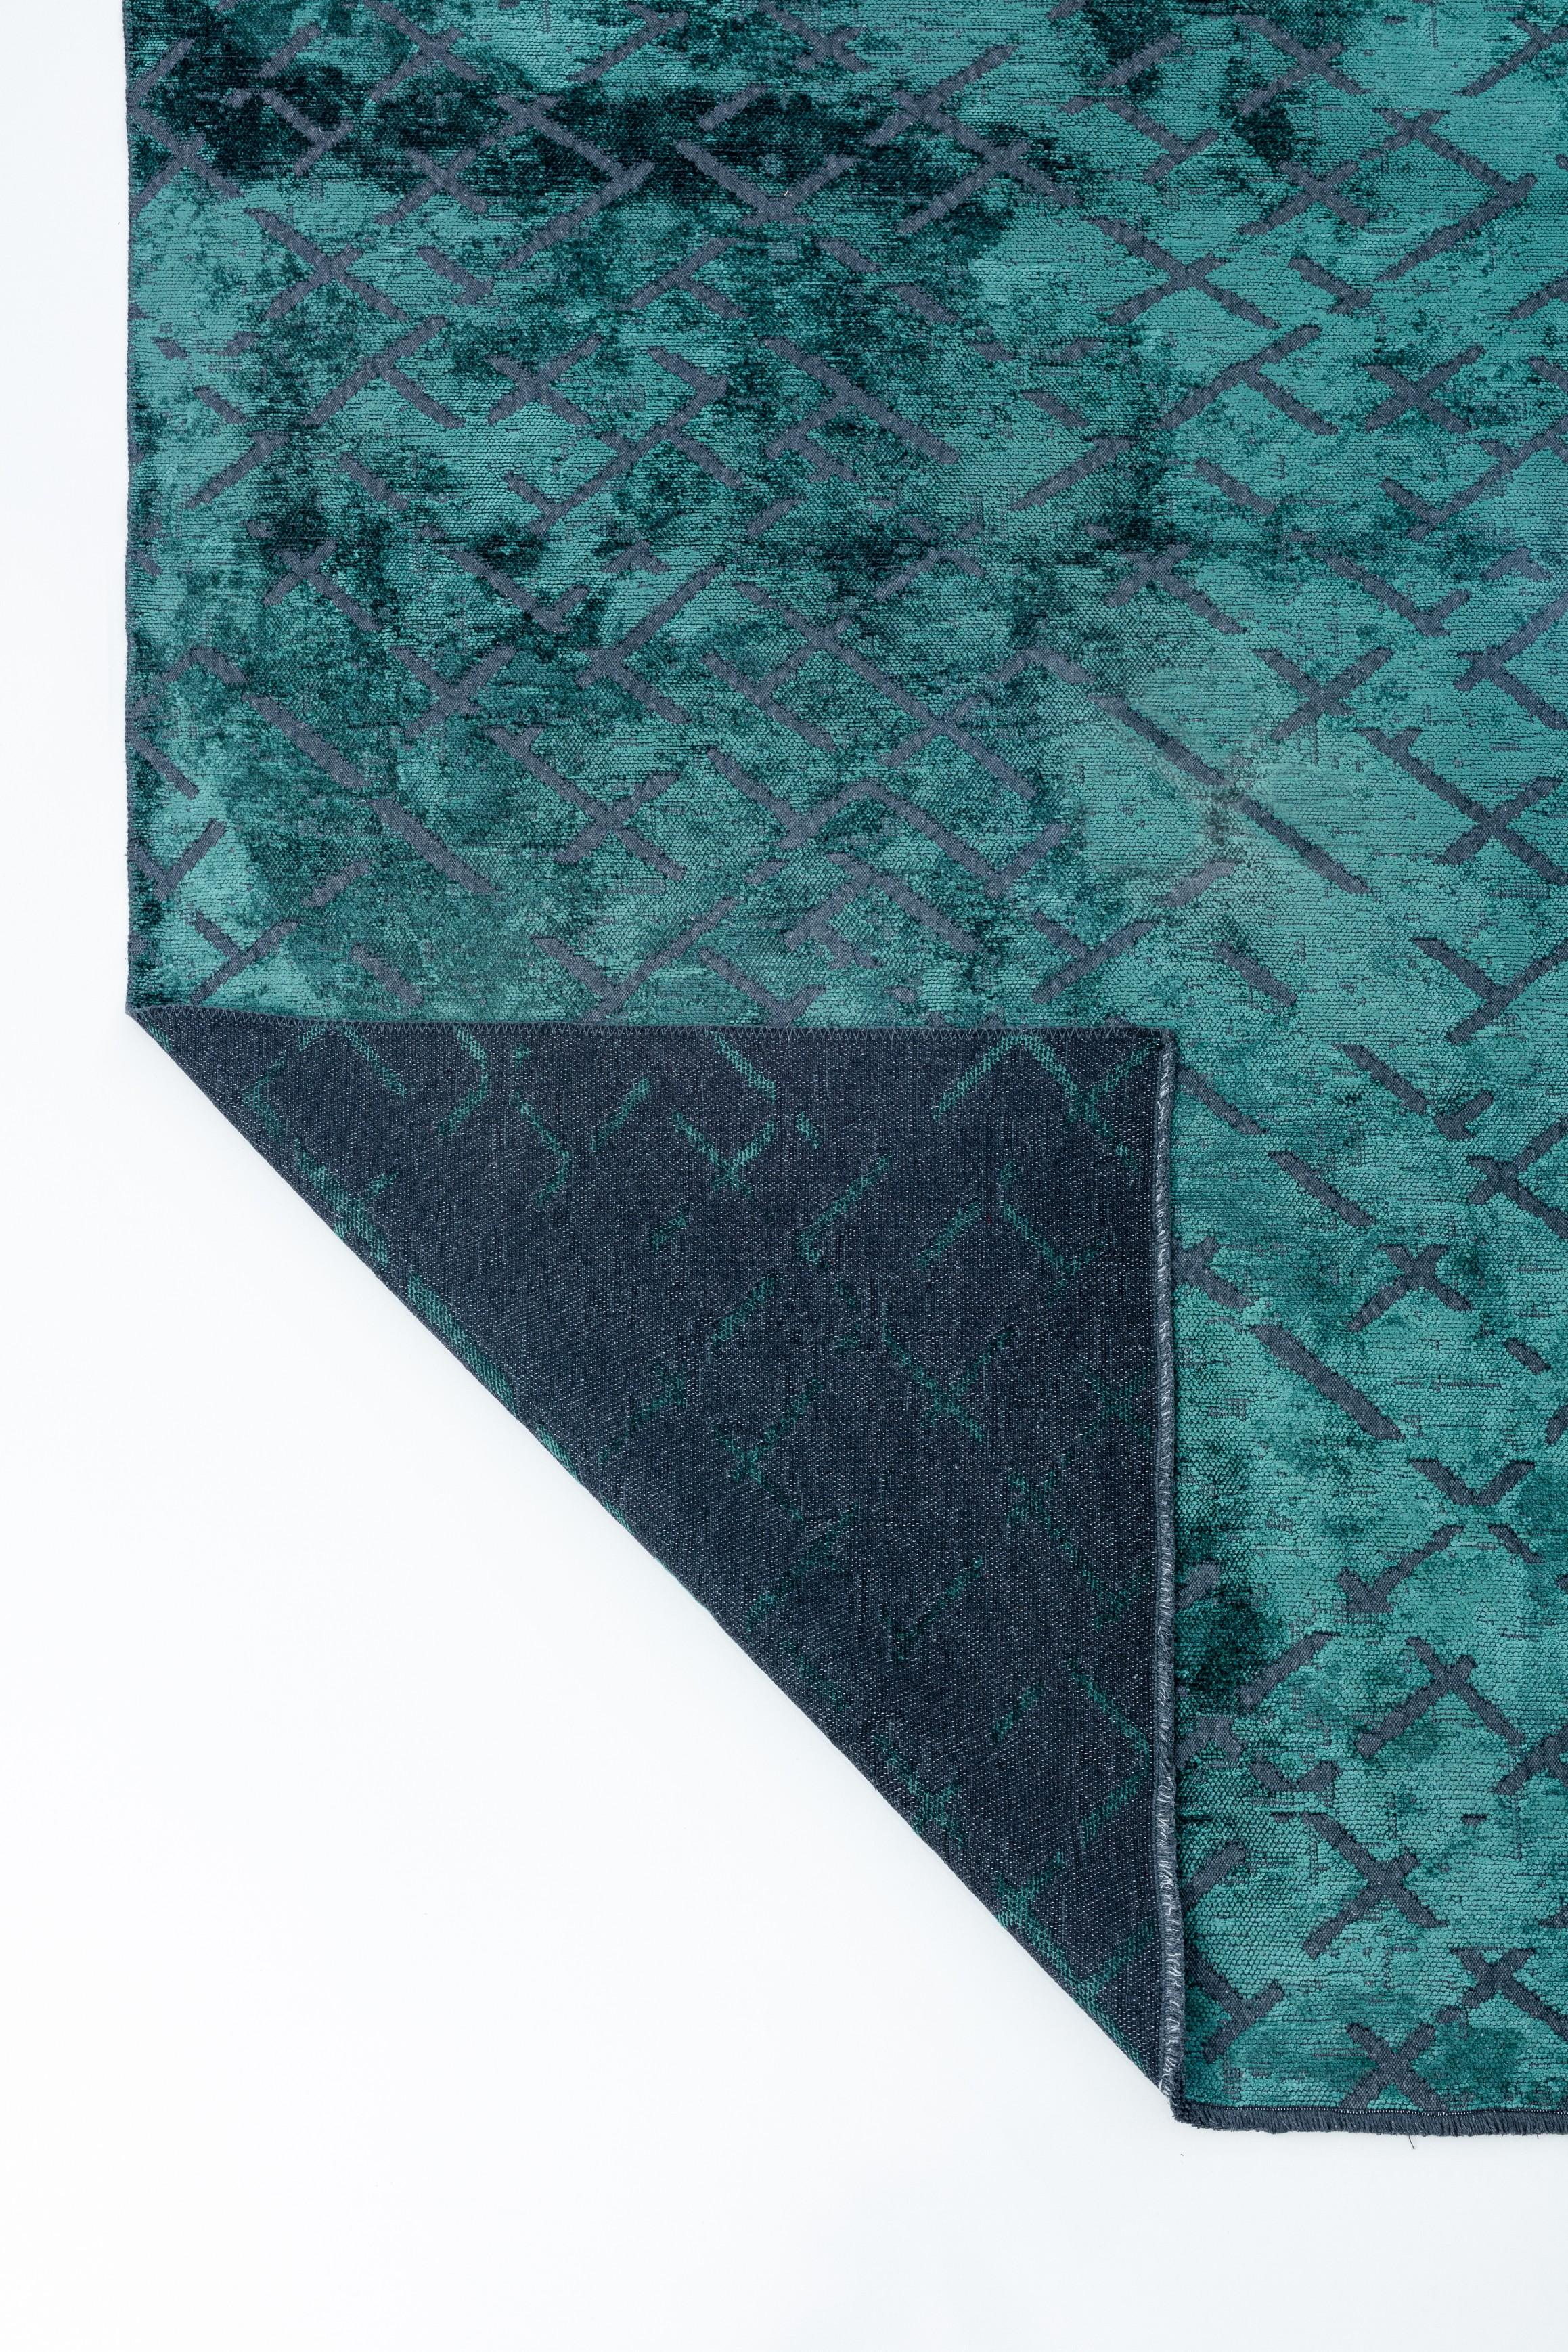 For Sale:  (Green) Modern  Abstract Luxury Hand-Finished Area Rug 3